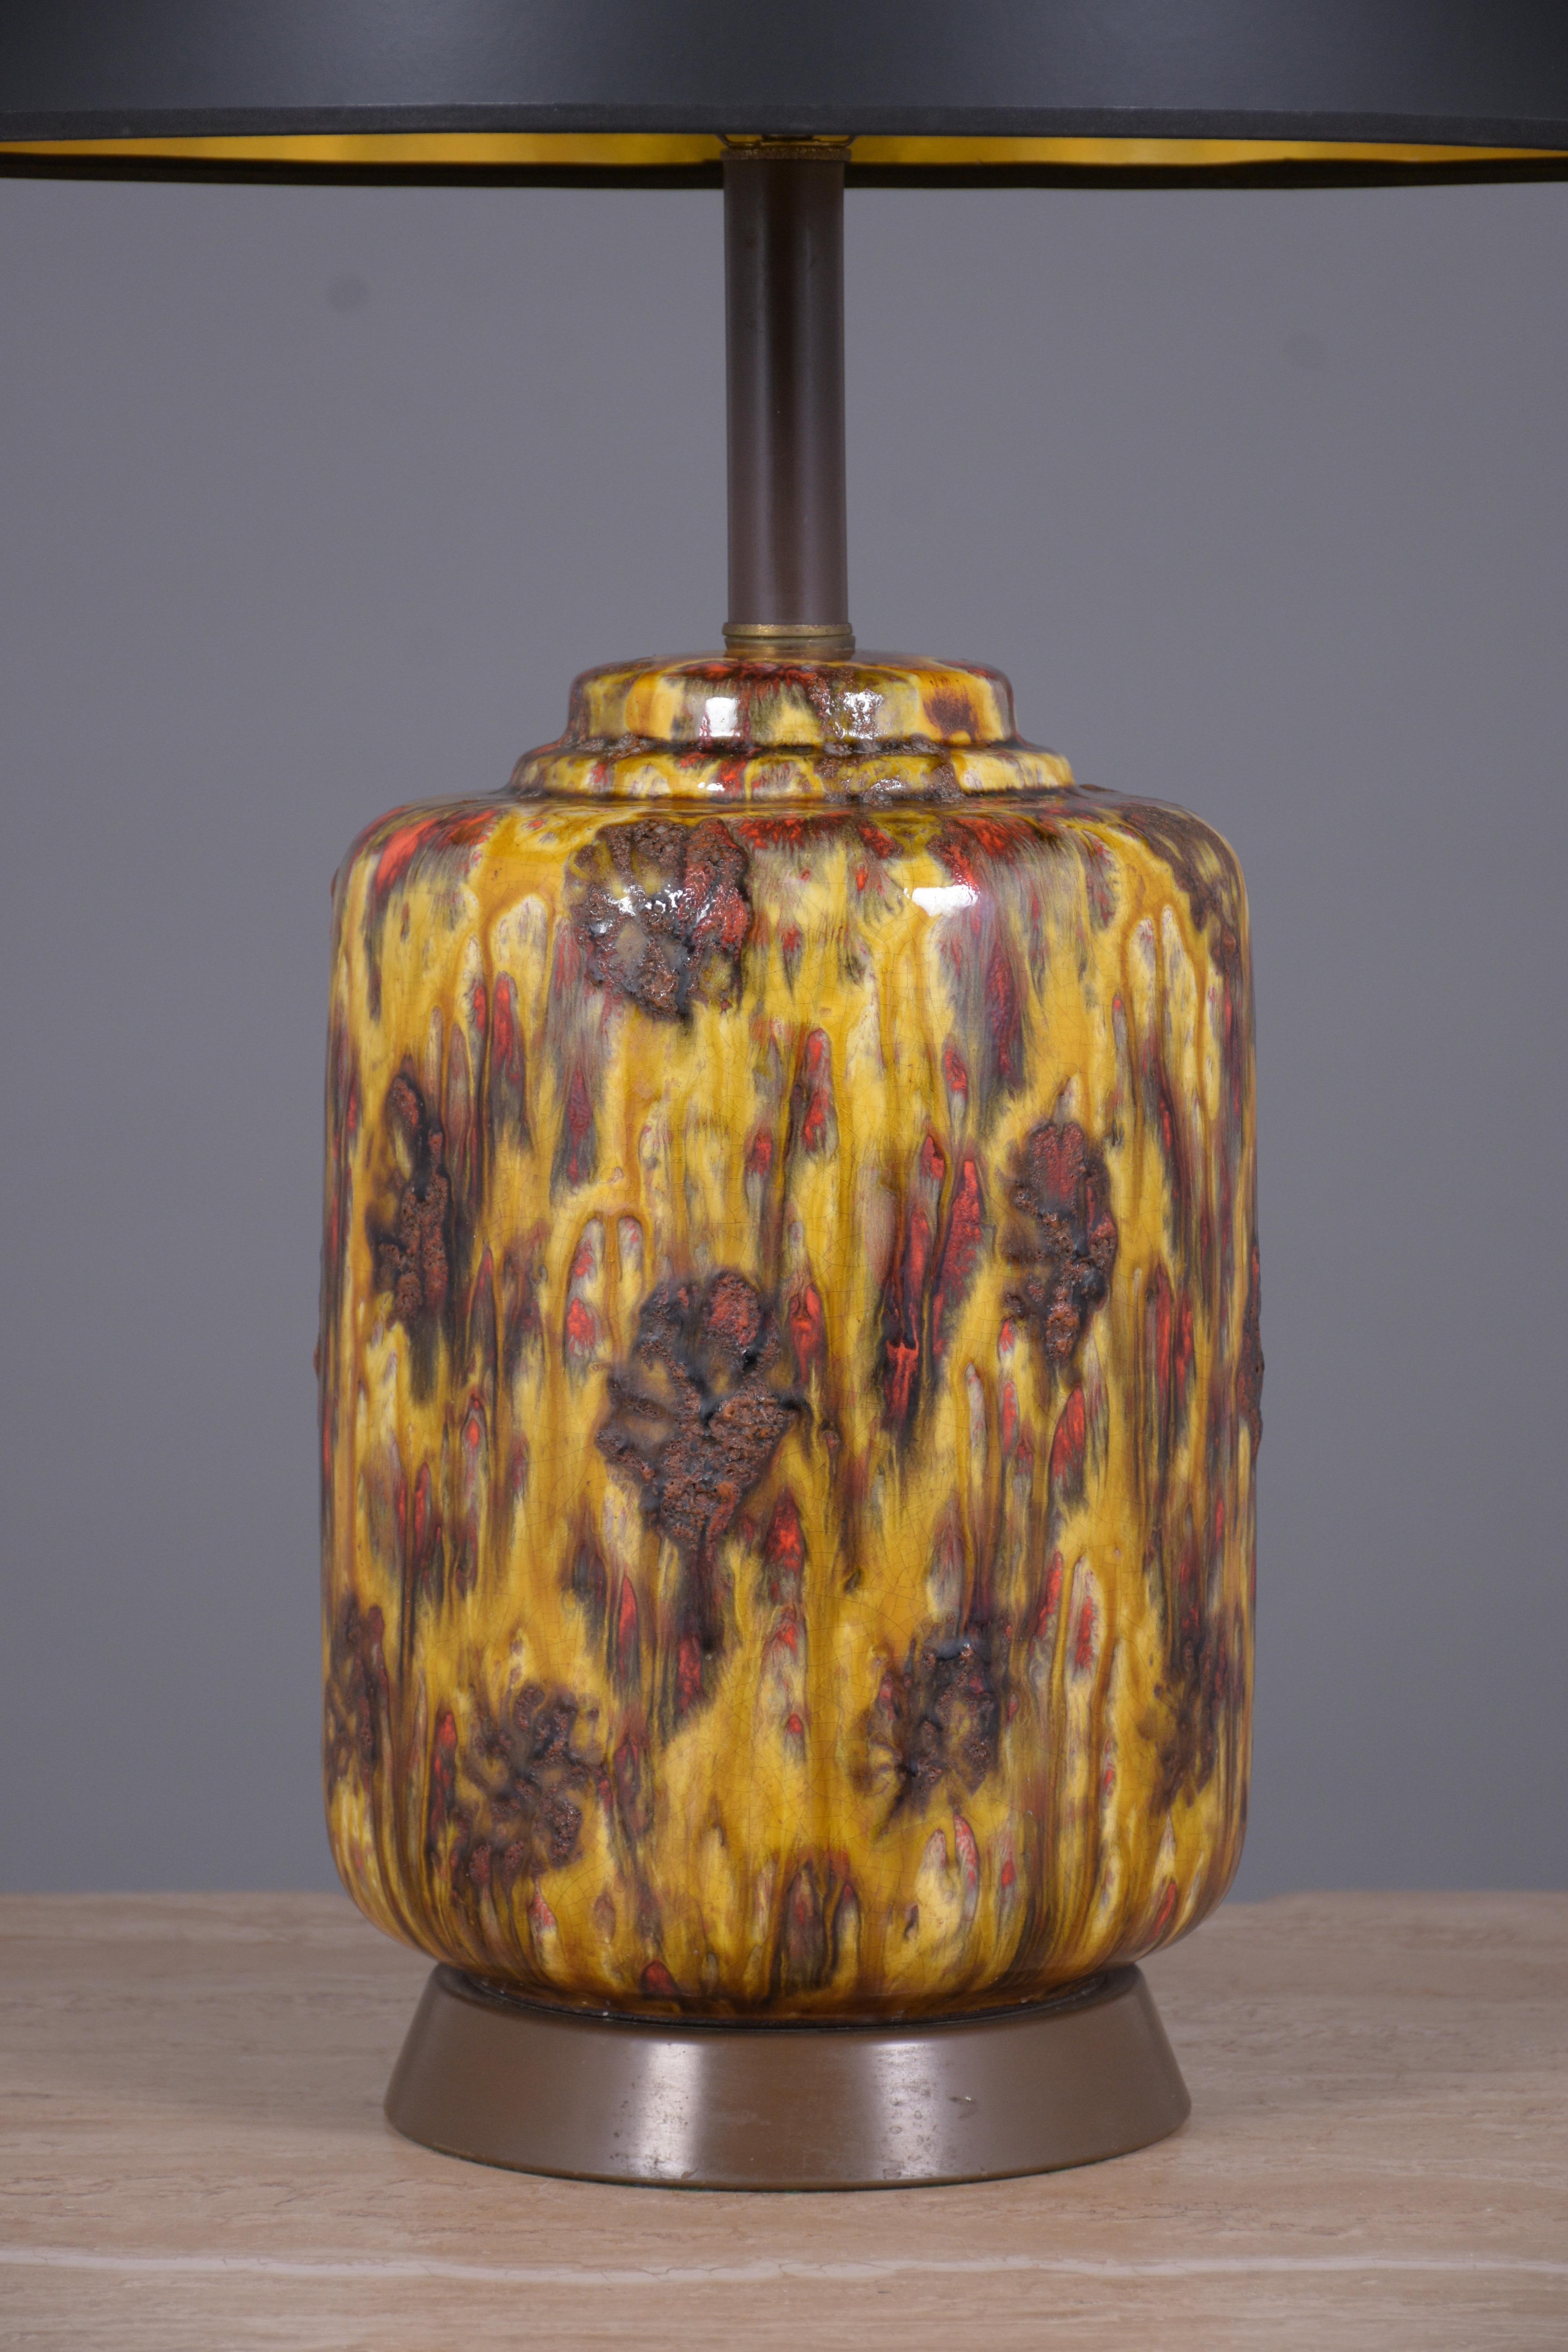 Vintage Mid-Century Modern Glazed Ceramic Table Lamp In Good Condition For Sale In Los Angeles, CA